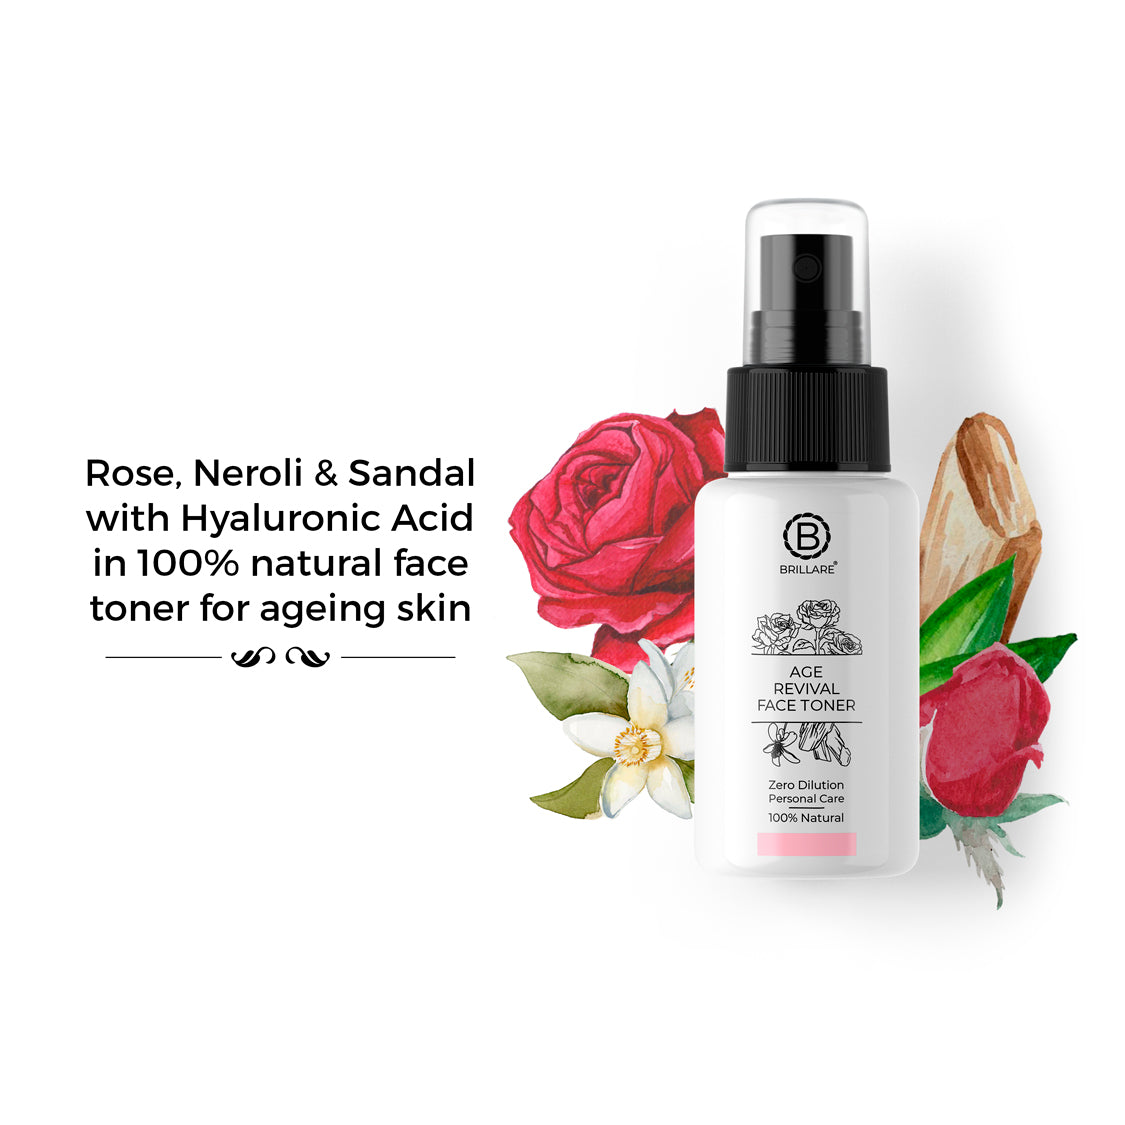 Age Revival Face toner For Ageing Skin